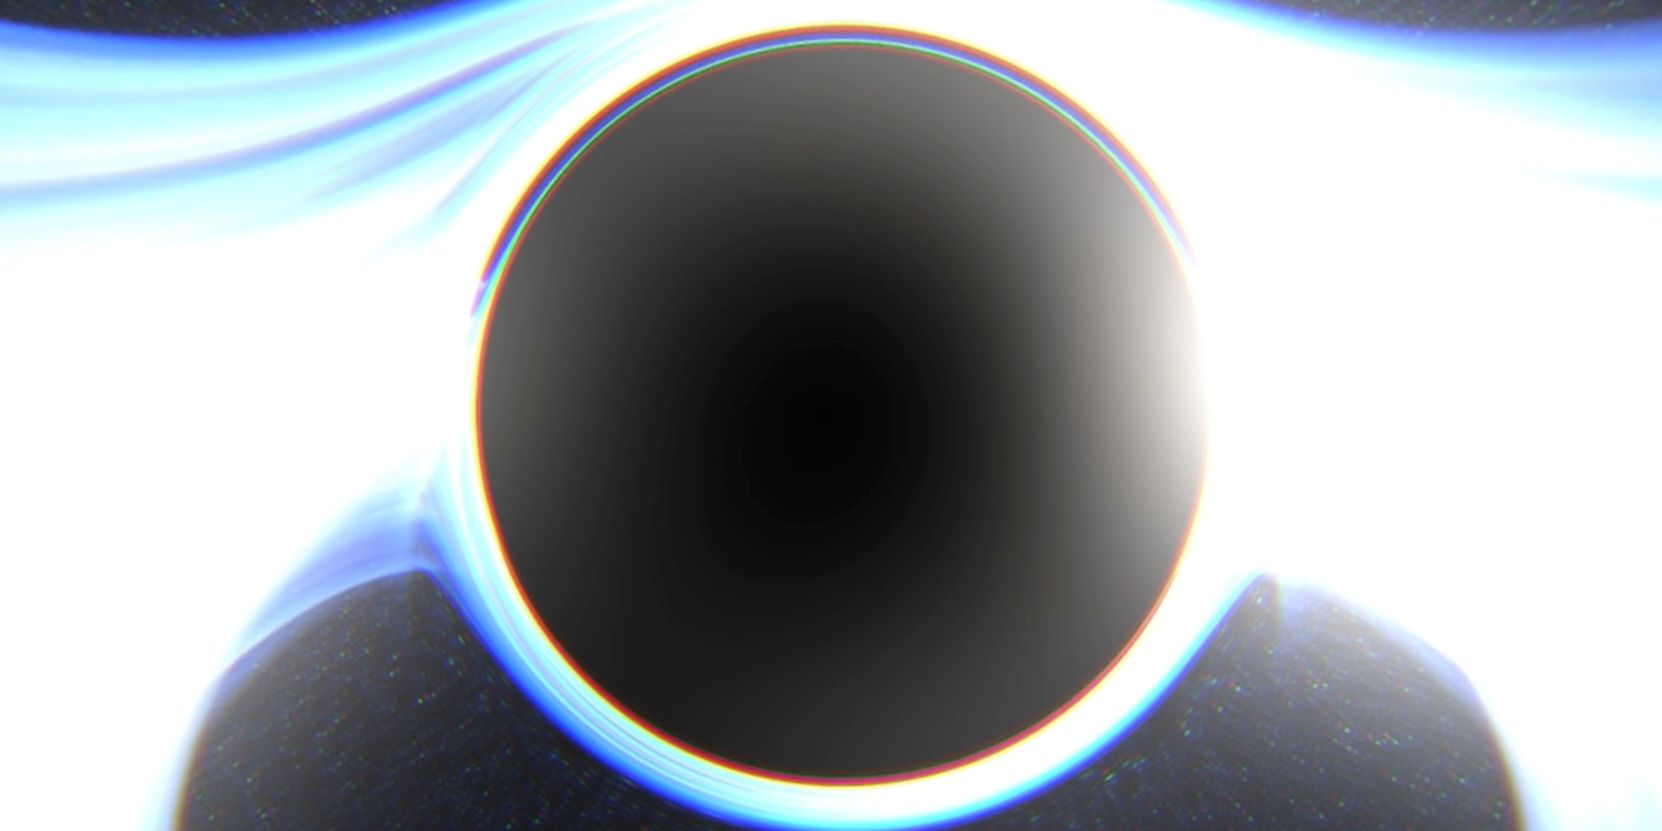 Screenshot from a VR video about falling into a black hole